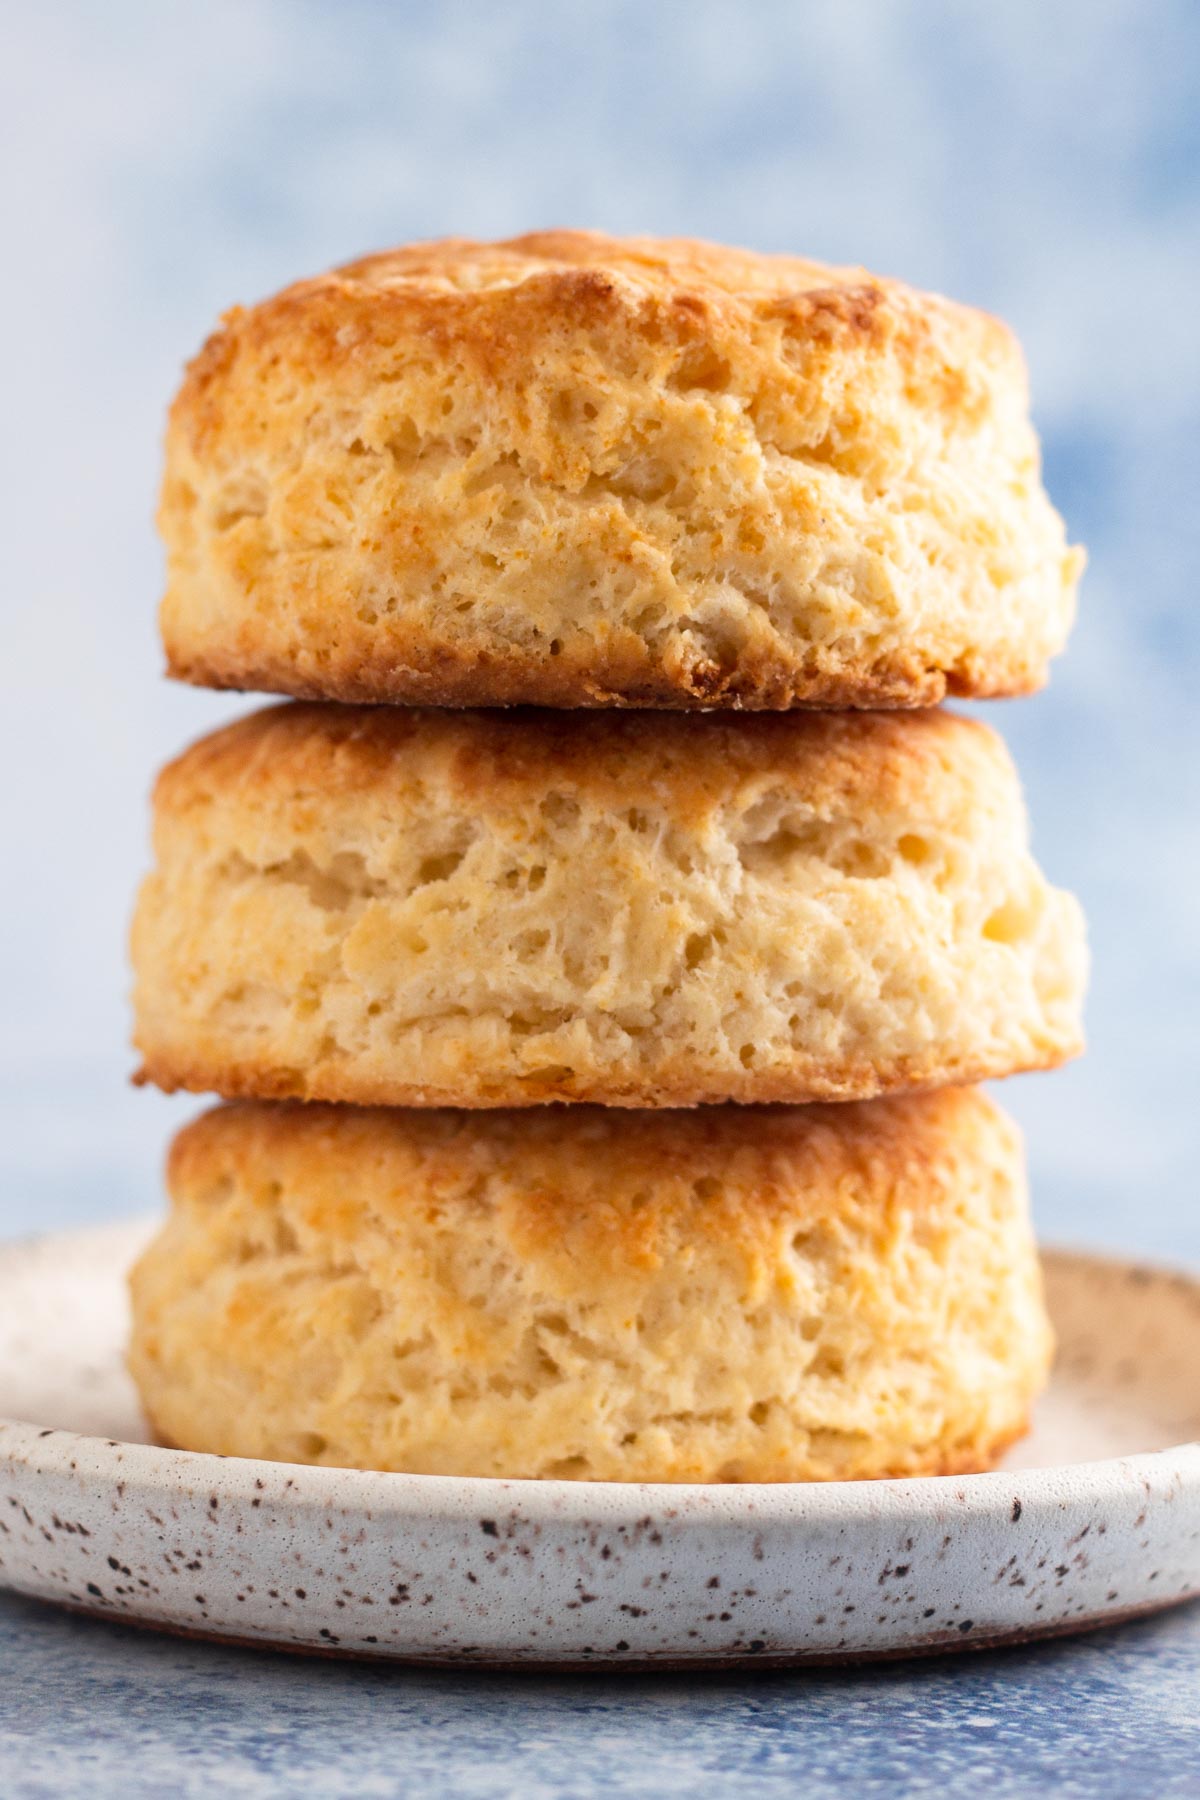 side view of biscuits stacked on a white speckled plate with a blue background